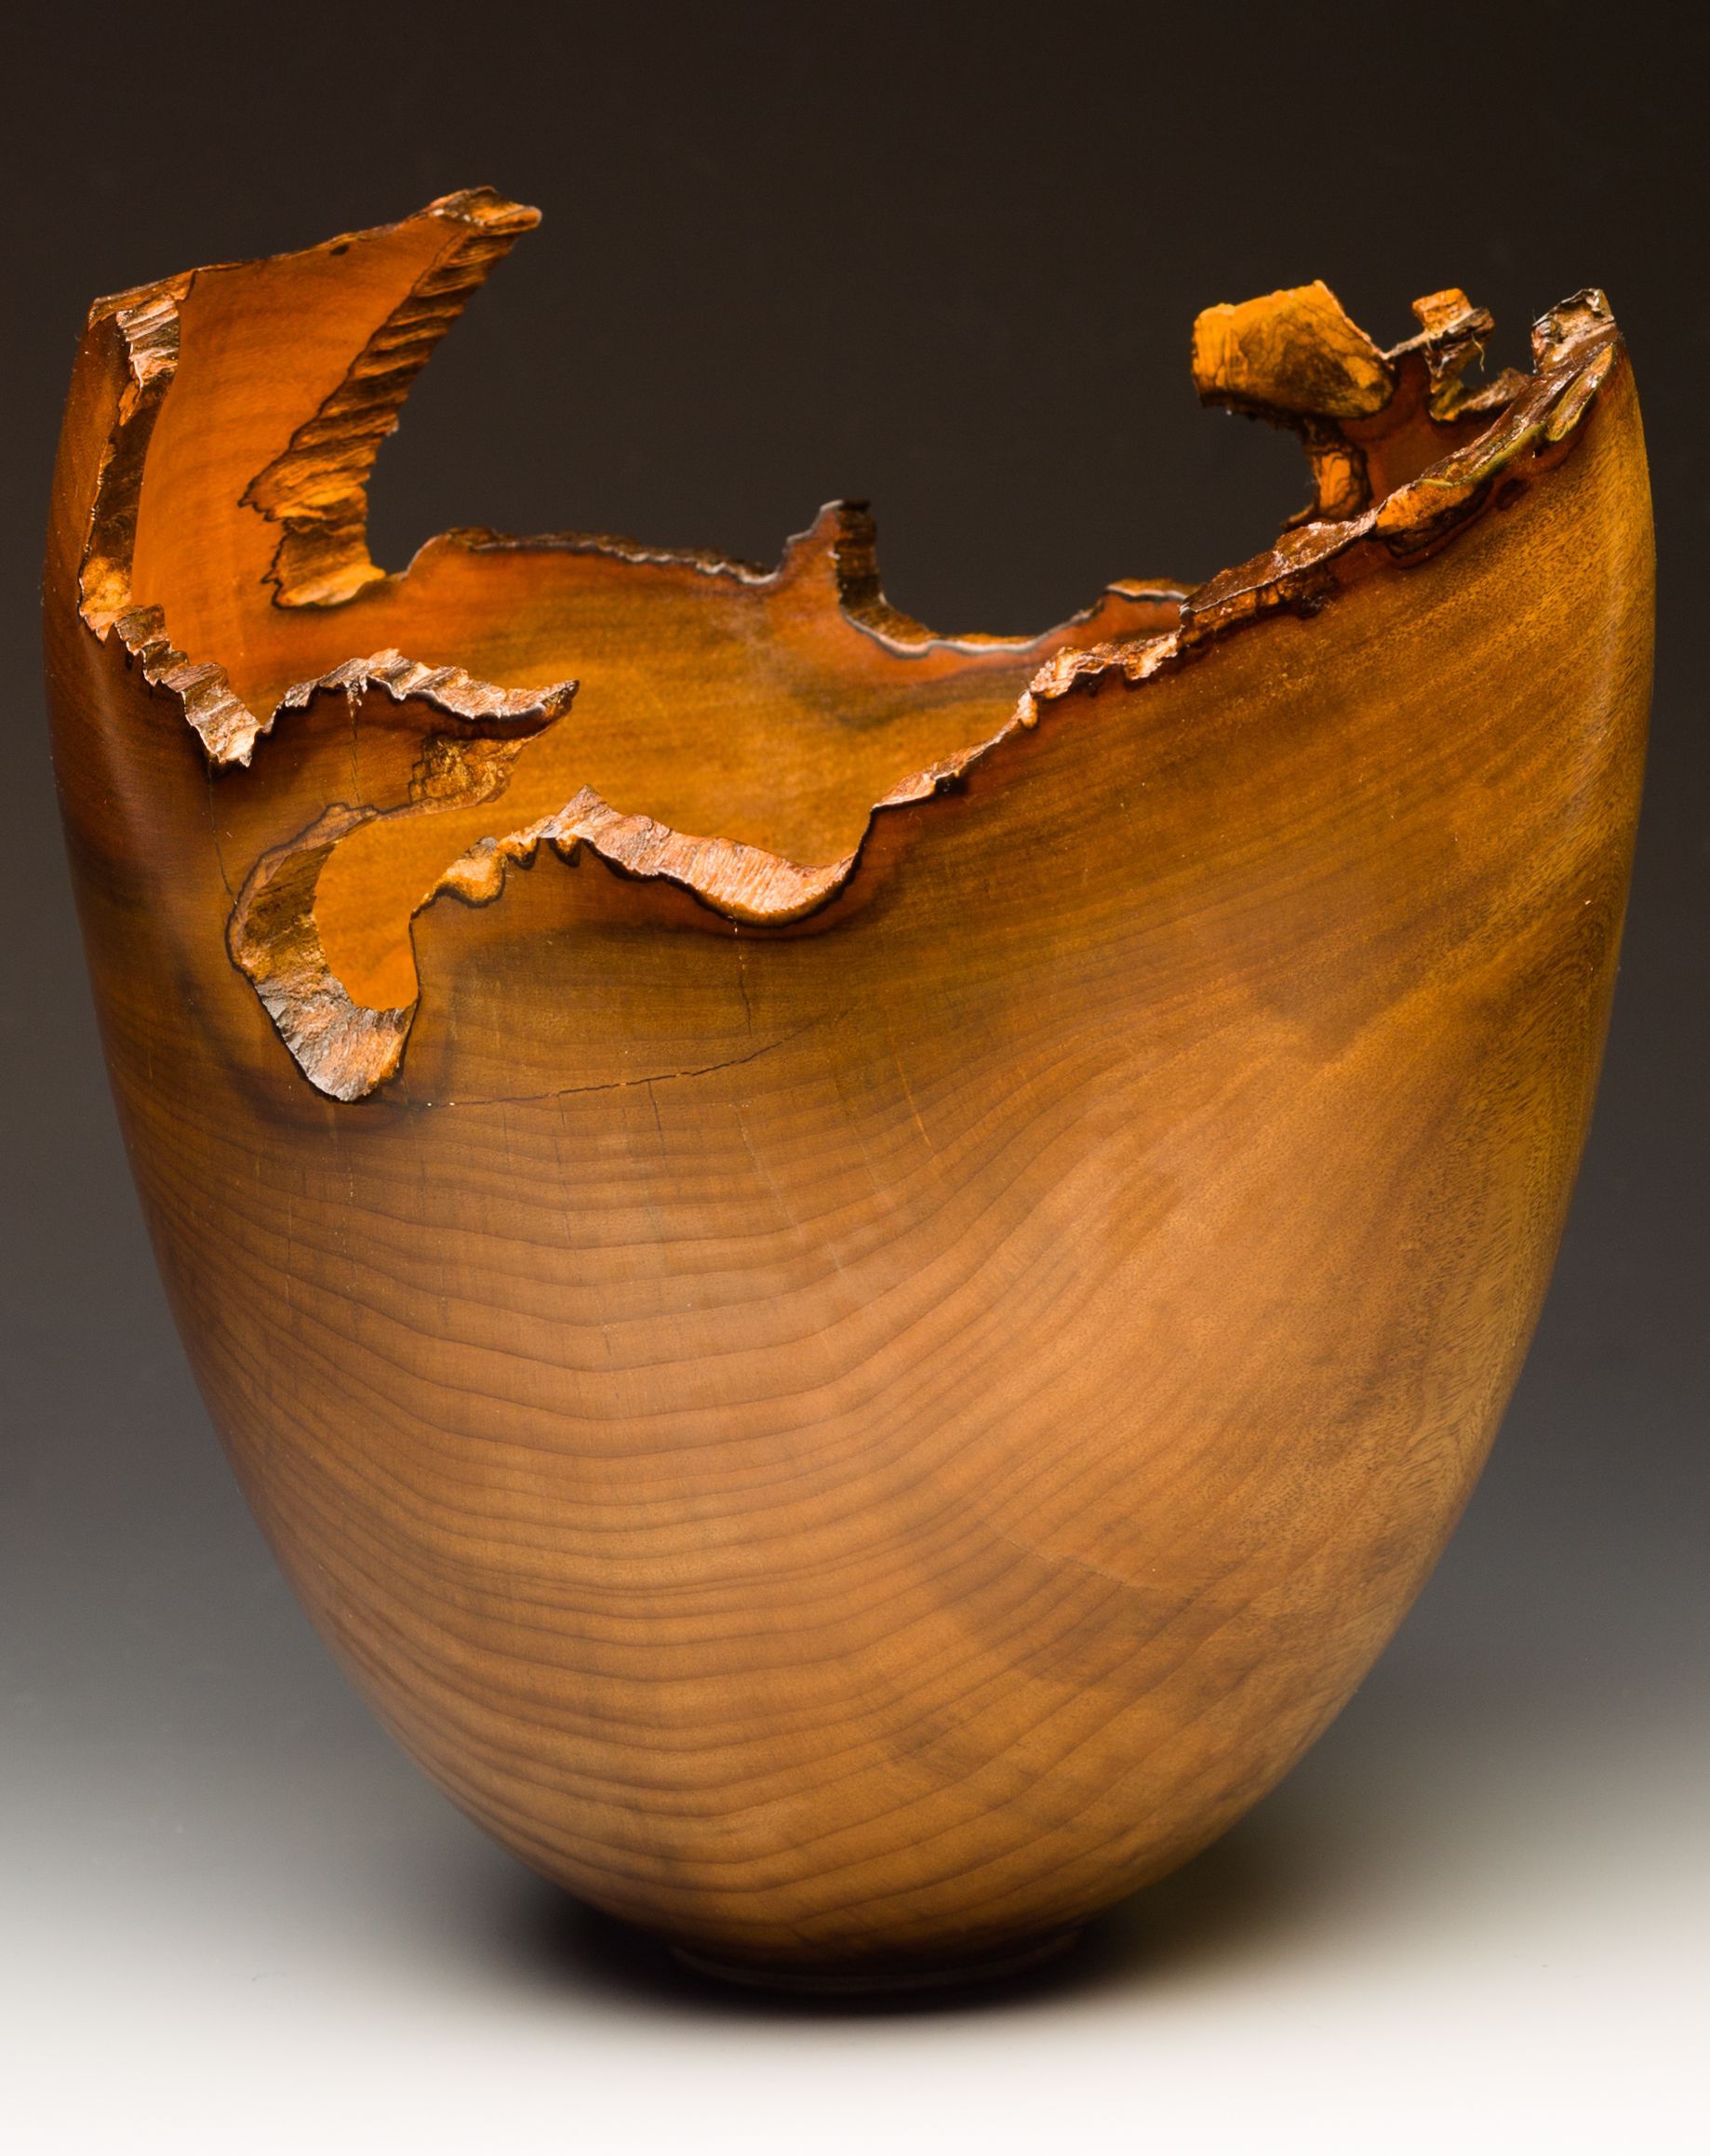 Beautiful Myrtle Wood bowl by Dale L. Nish. Part of the Nish collection on display at Craft Supplies USA. #woodtu. Wood turning, Wood turning projects, Wood bowls